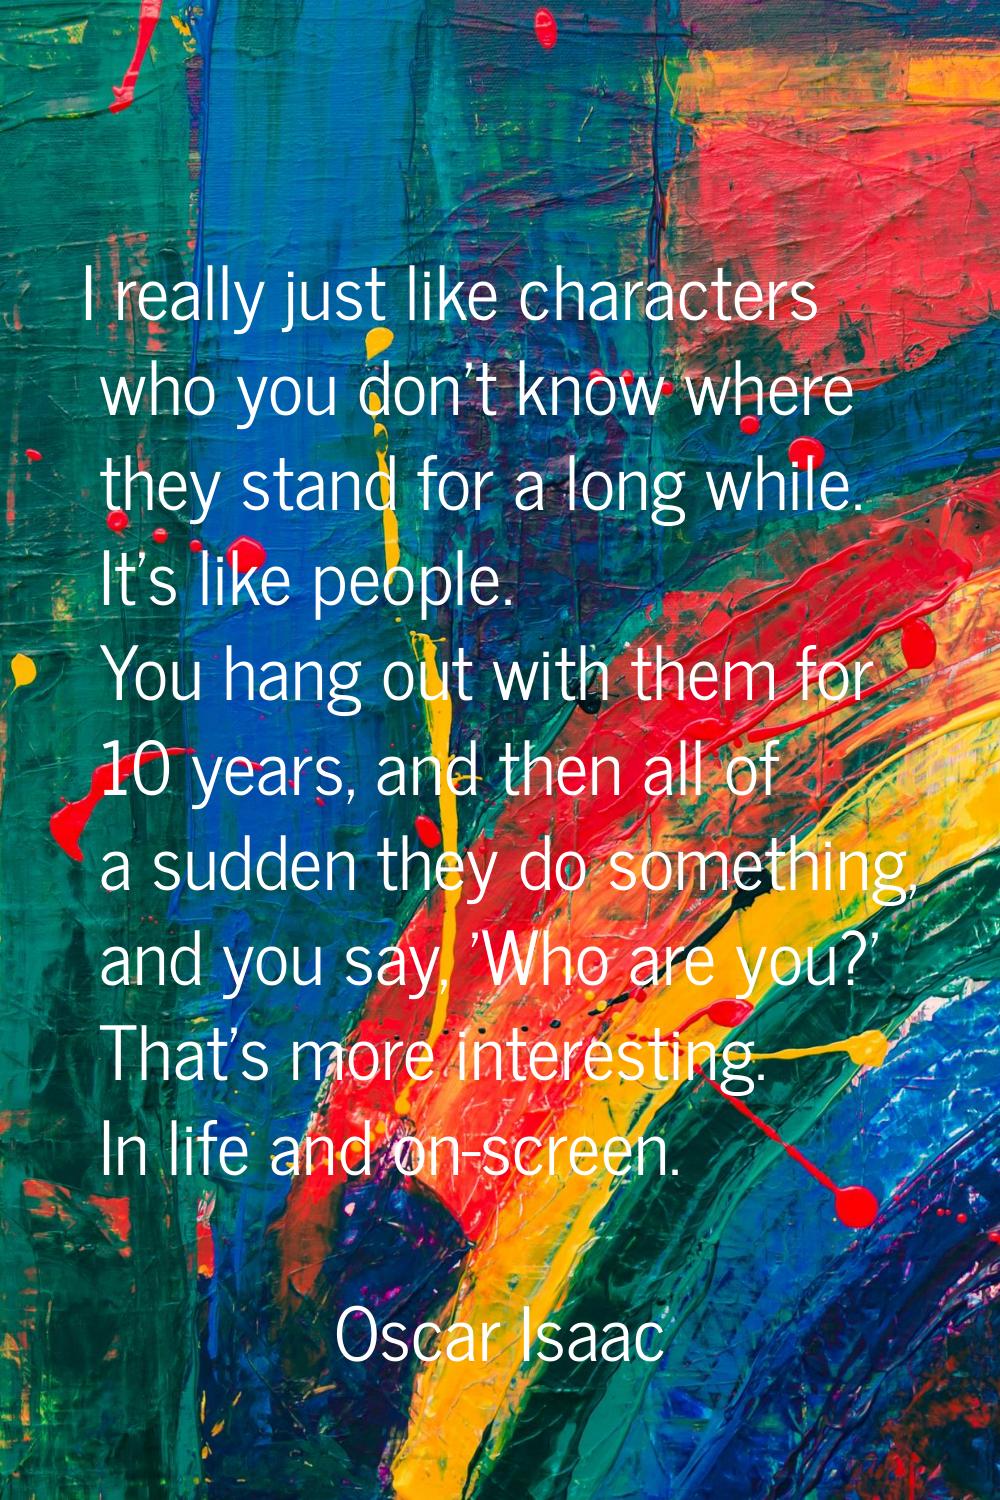 I really just like characters who you don't know where they stand for a long while. It's like peopl